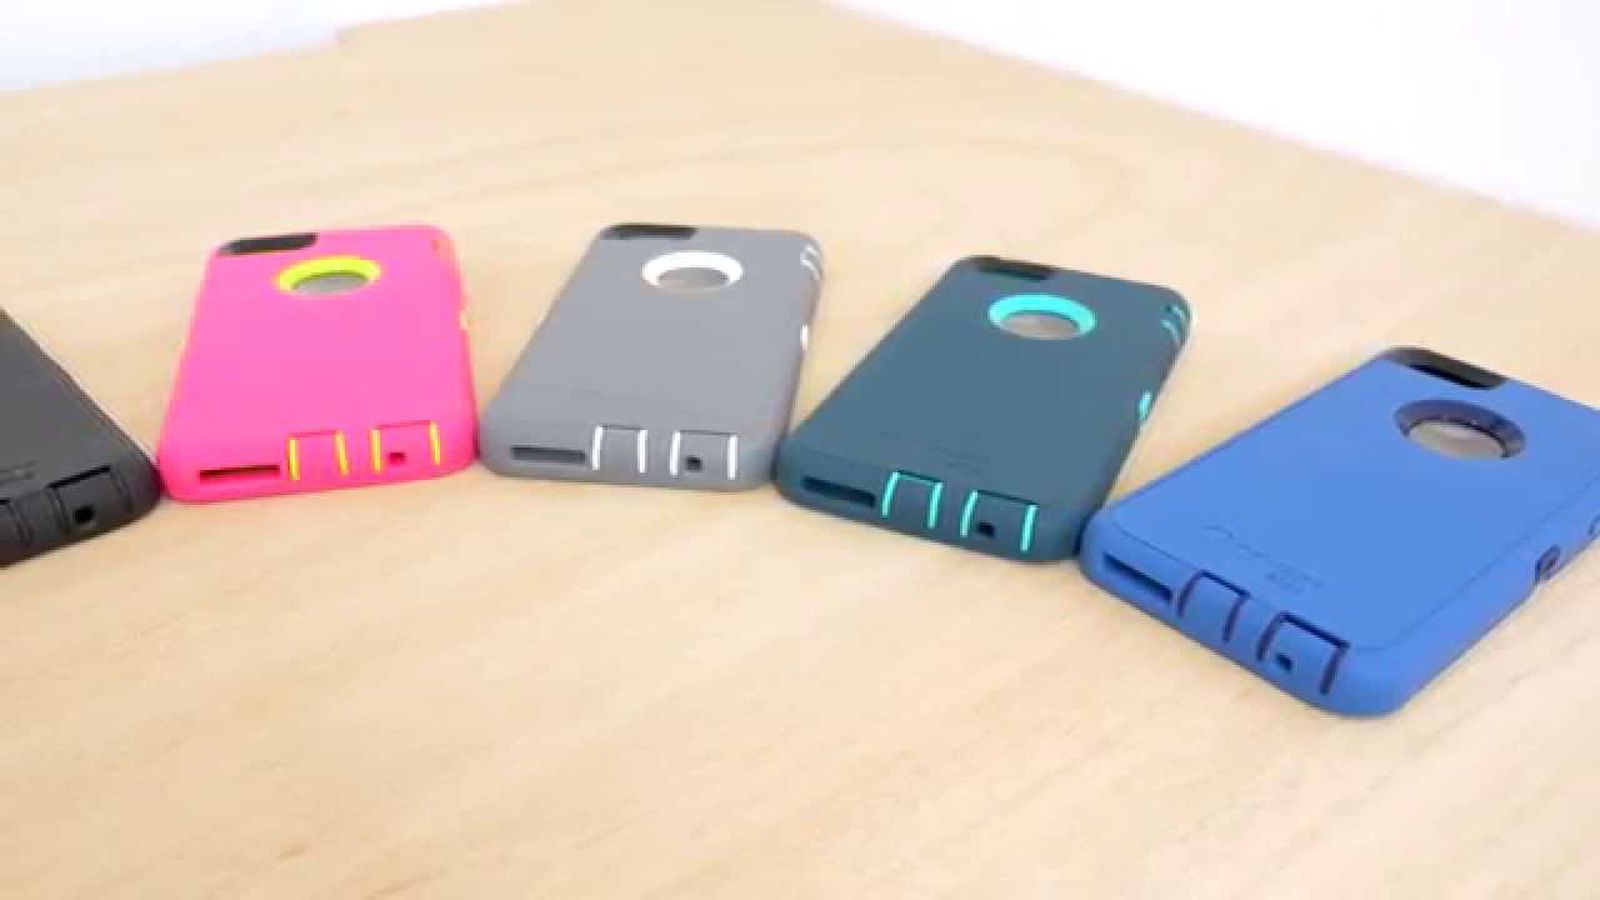 Otterbox Video Review: Hands-On With the Defender and Commuter Cases for iPhone 6 Plus